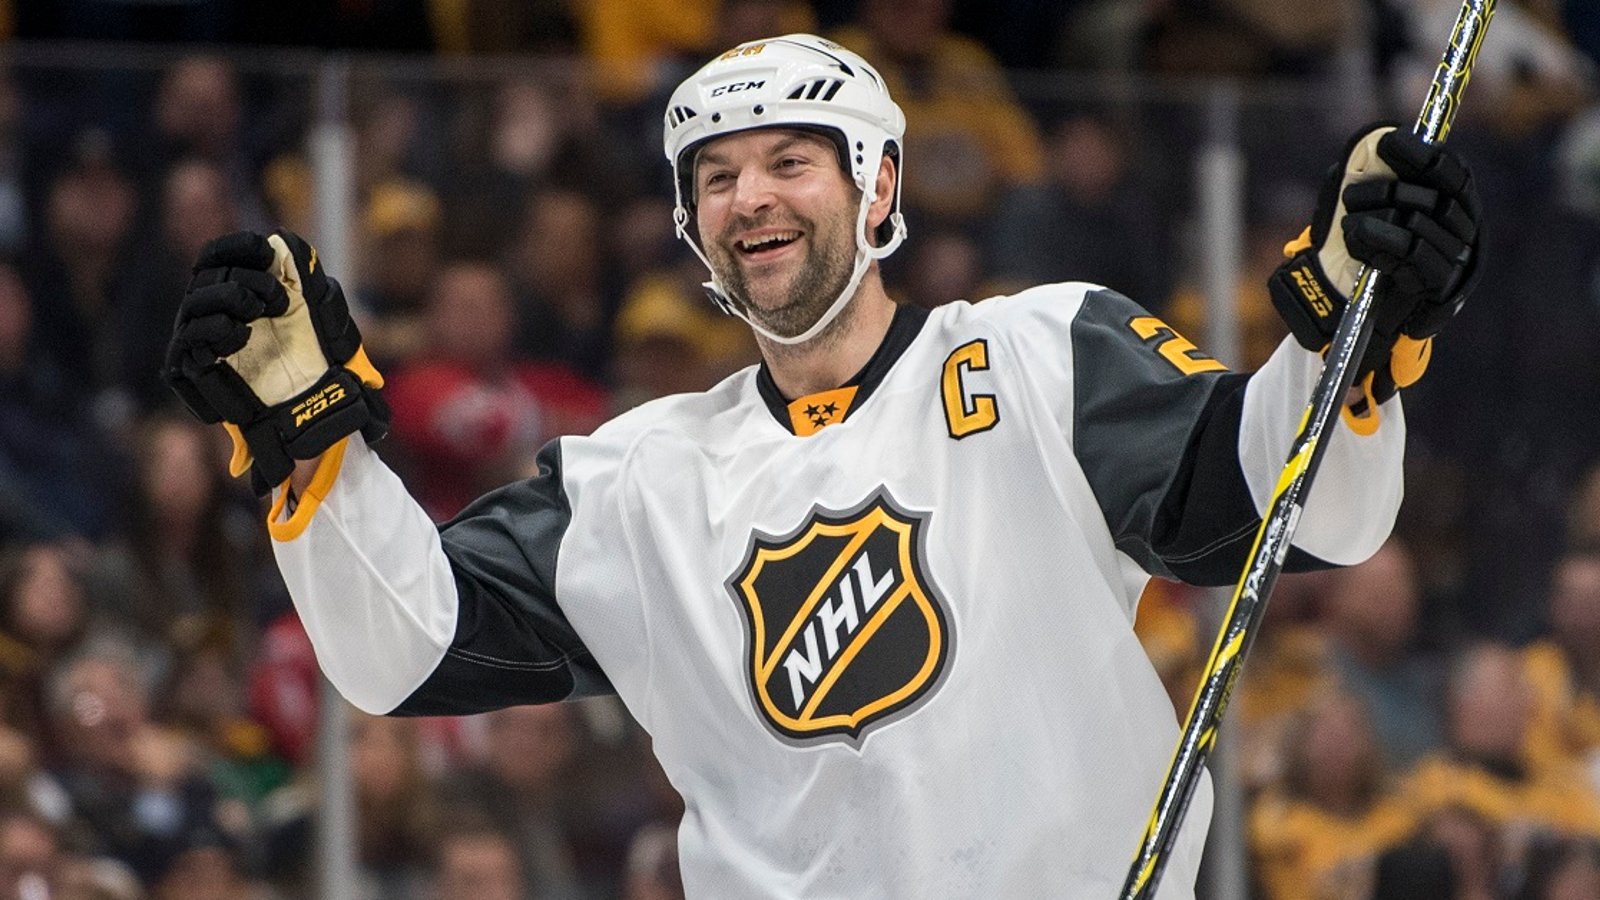 John Scott sends hilarious message to the players who weren't drafted at the 2019 NHL Draft.